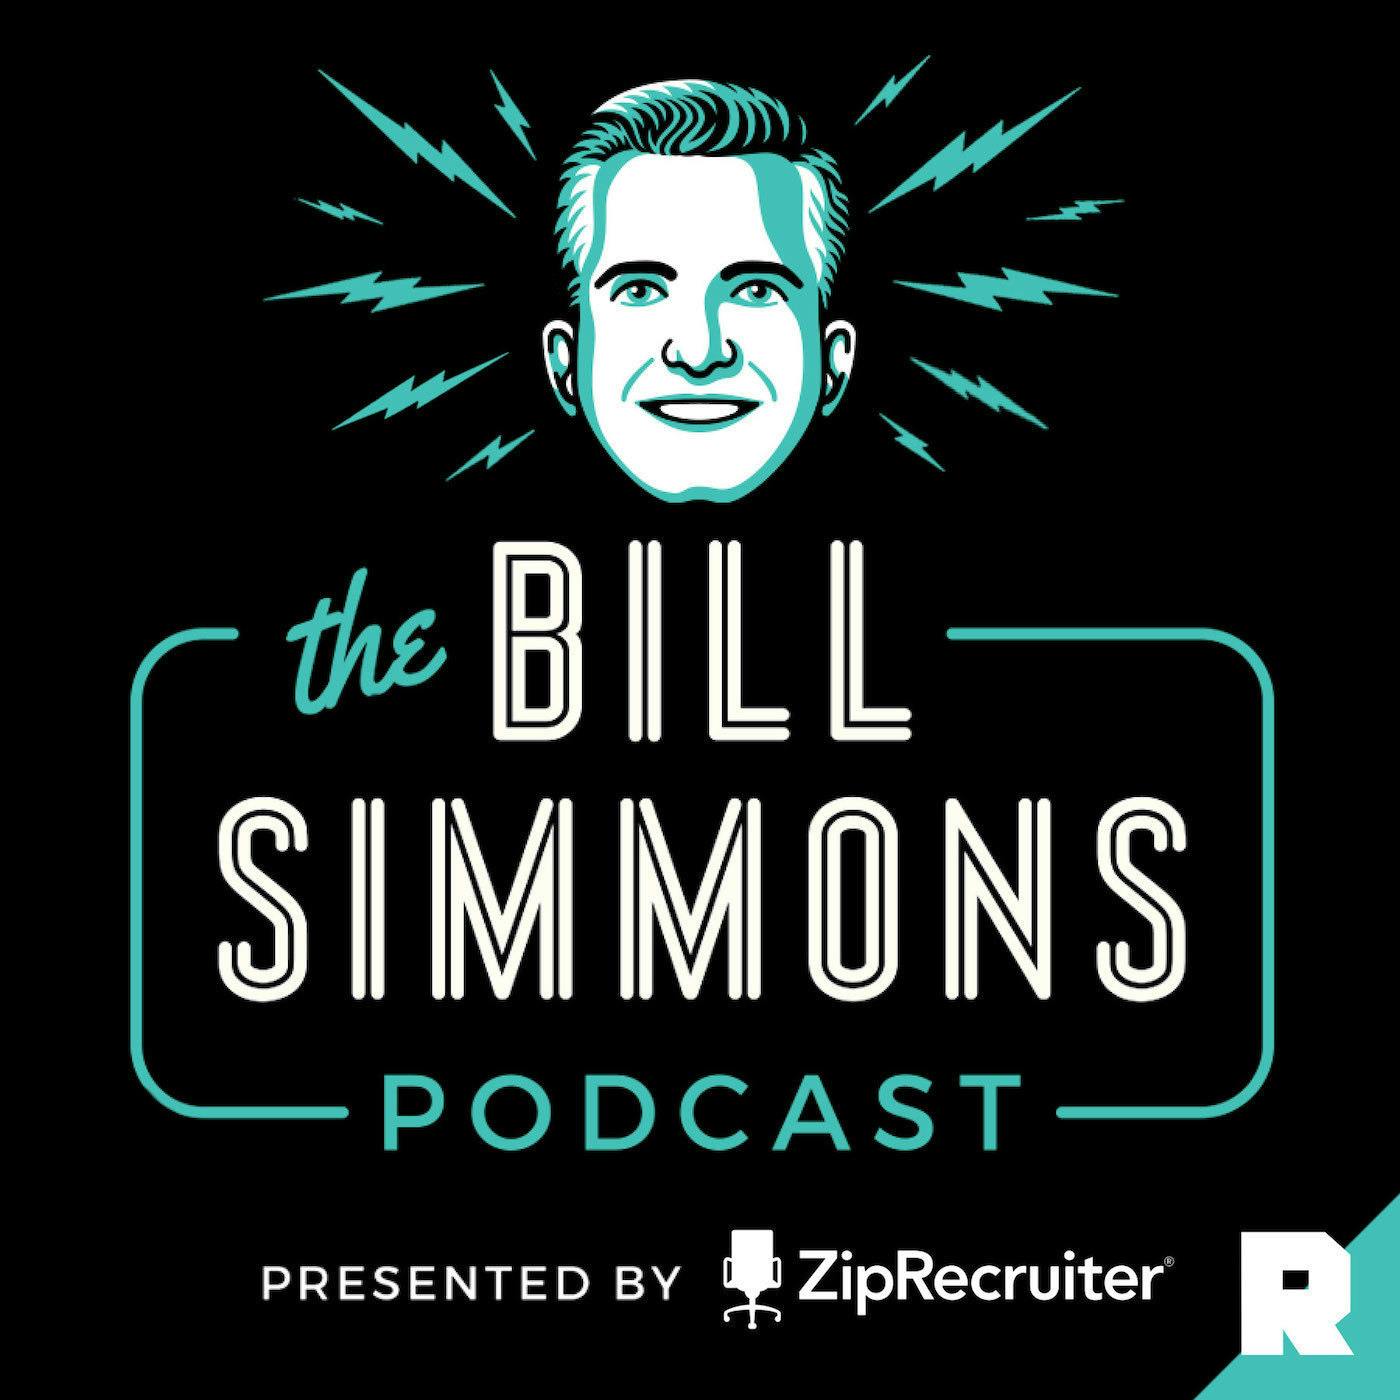 Denzel Washington on 'He Got Game,' the Yankees, and LeBron. Plus, Yacht Rock Palooza. | The Bill Simmons Podcast (Ep. 390)